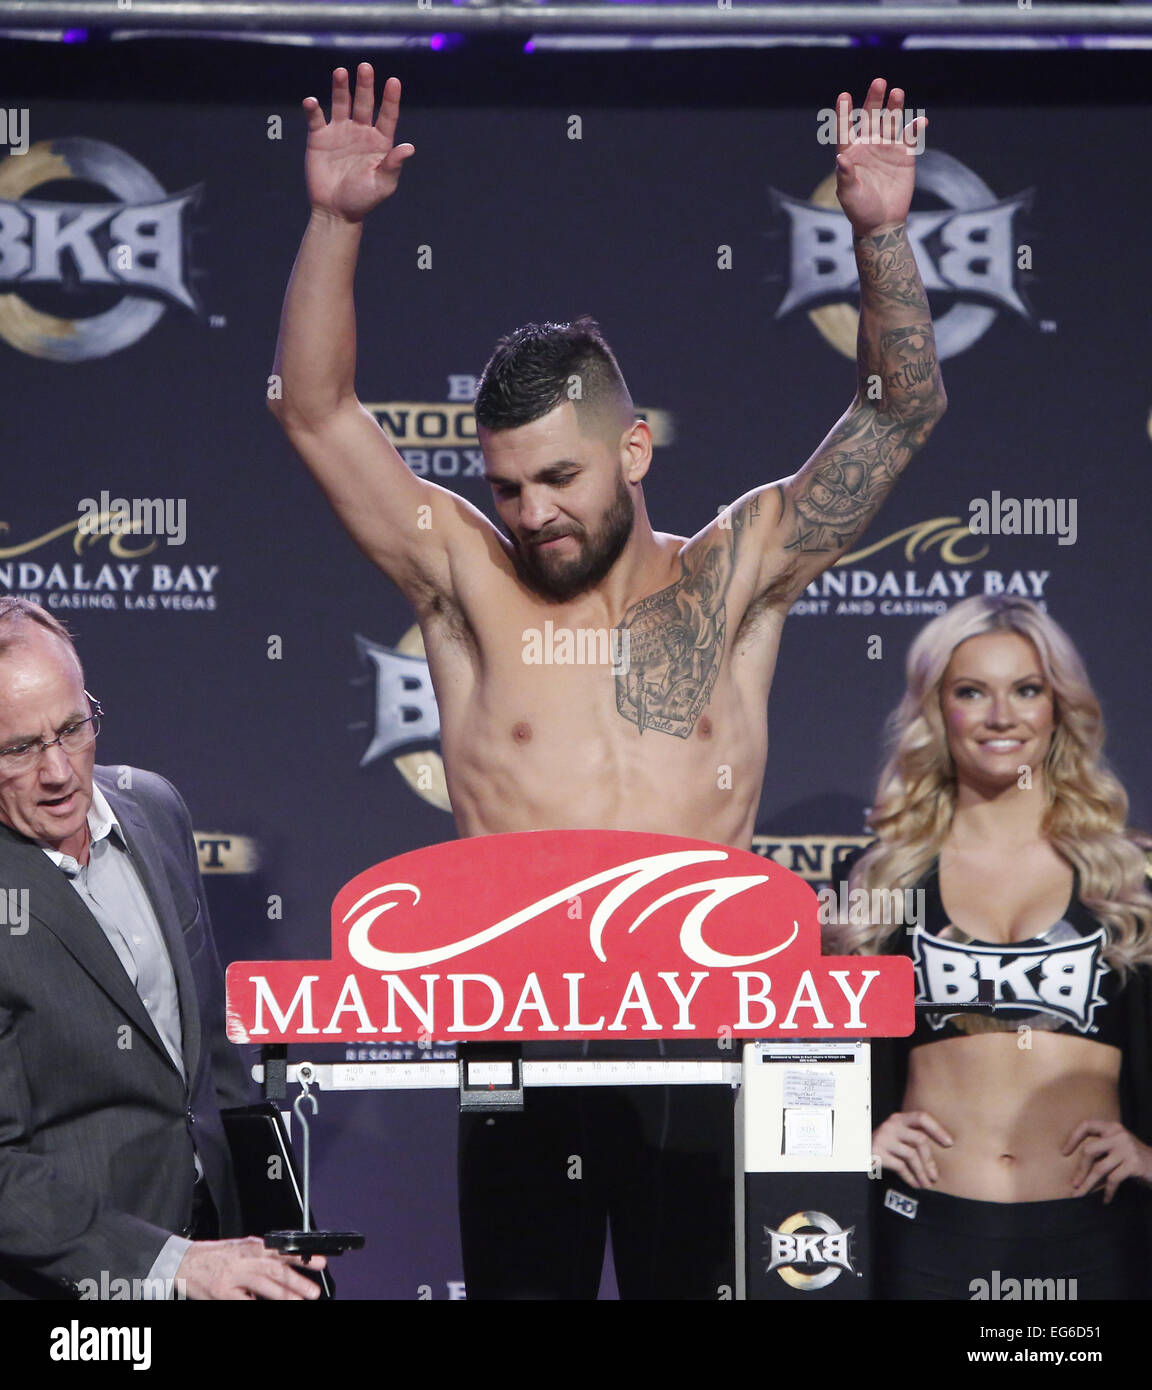 Competitors weigh in for the Big Knockout Boxing event at Mandalay Bay Resort Featuring: Bryan Vera Where: Las Vegas, Nevada, United States When: 16 Aug 2014 Stock Photo